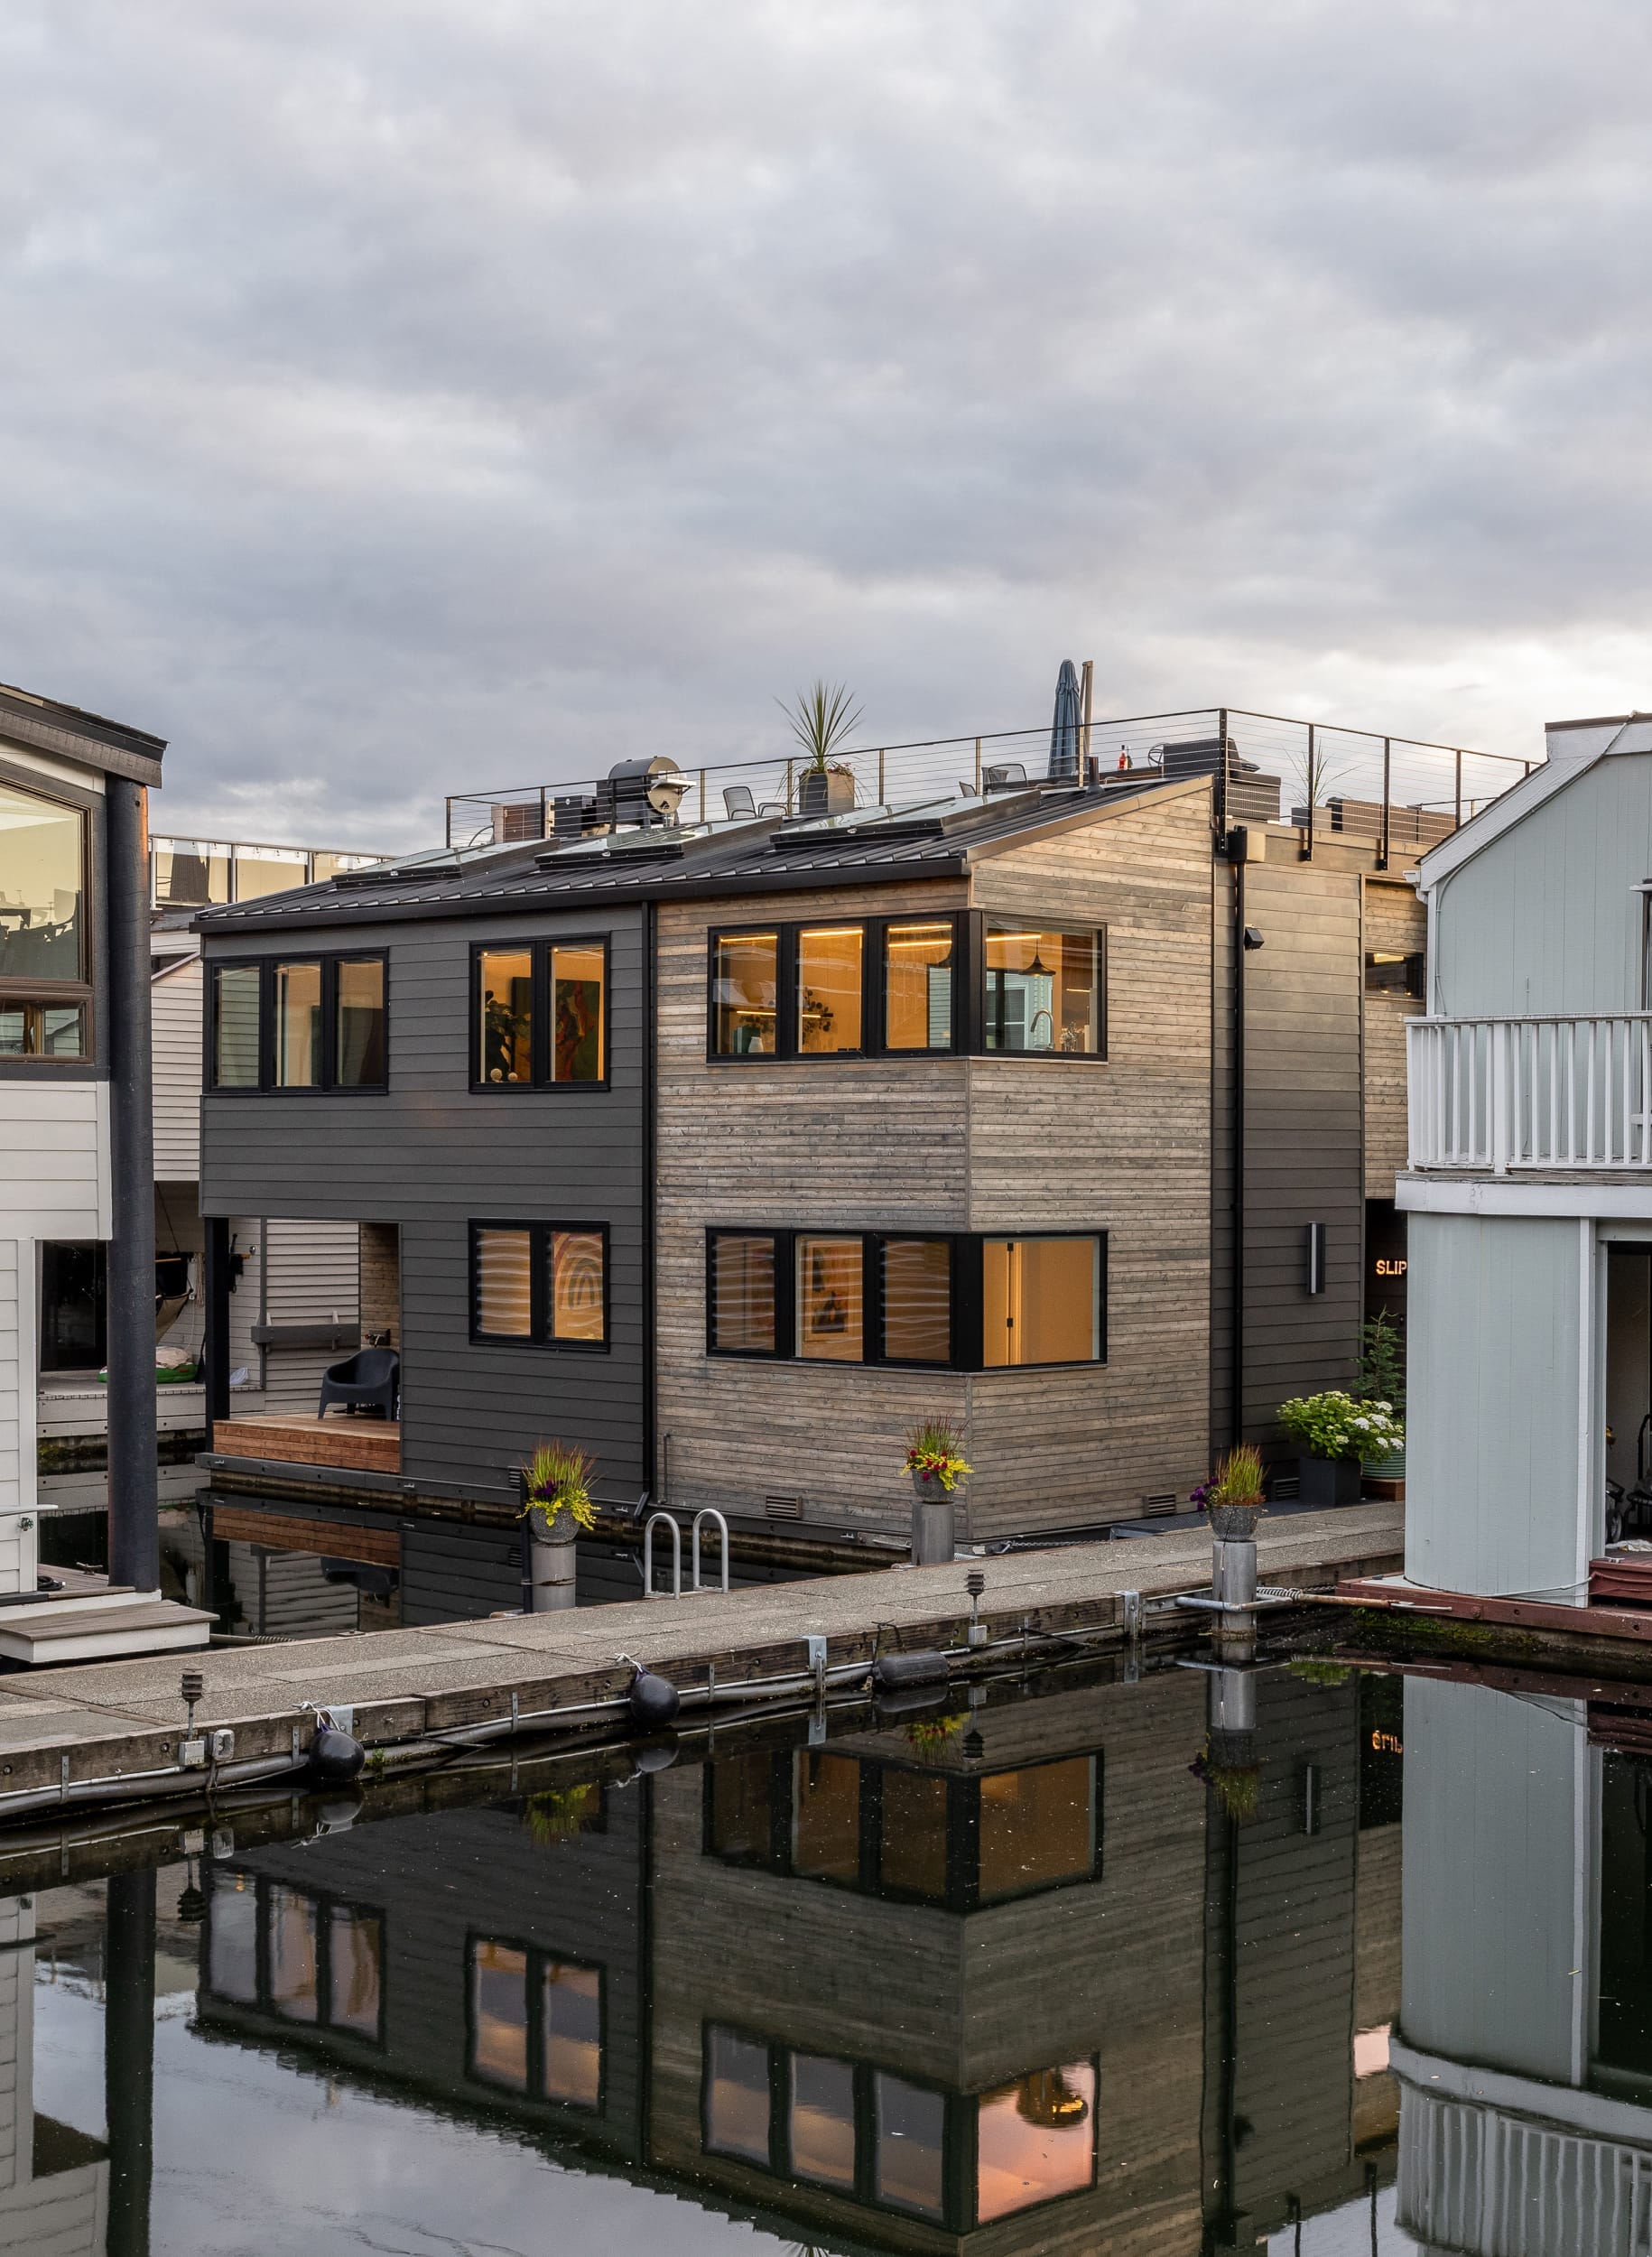 A row of modern houses on a waterway.